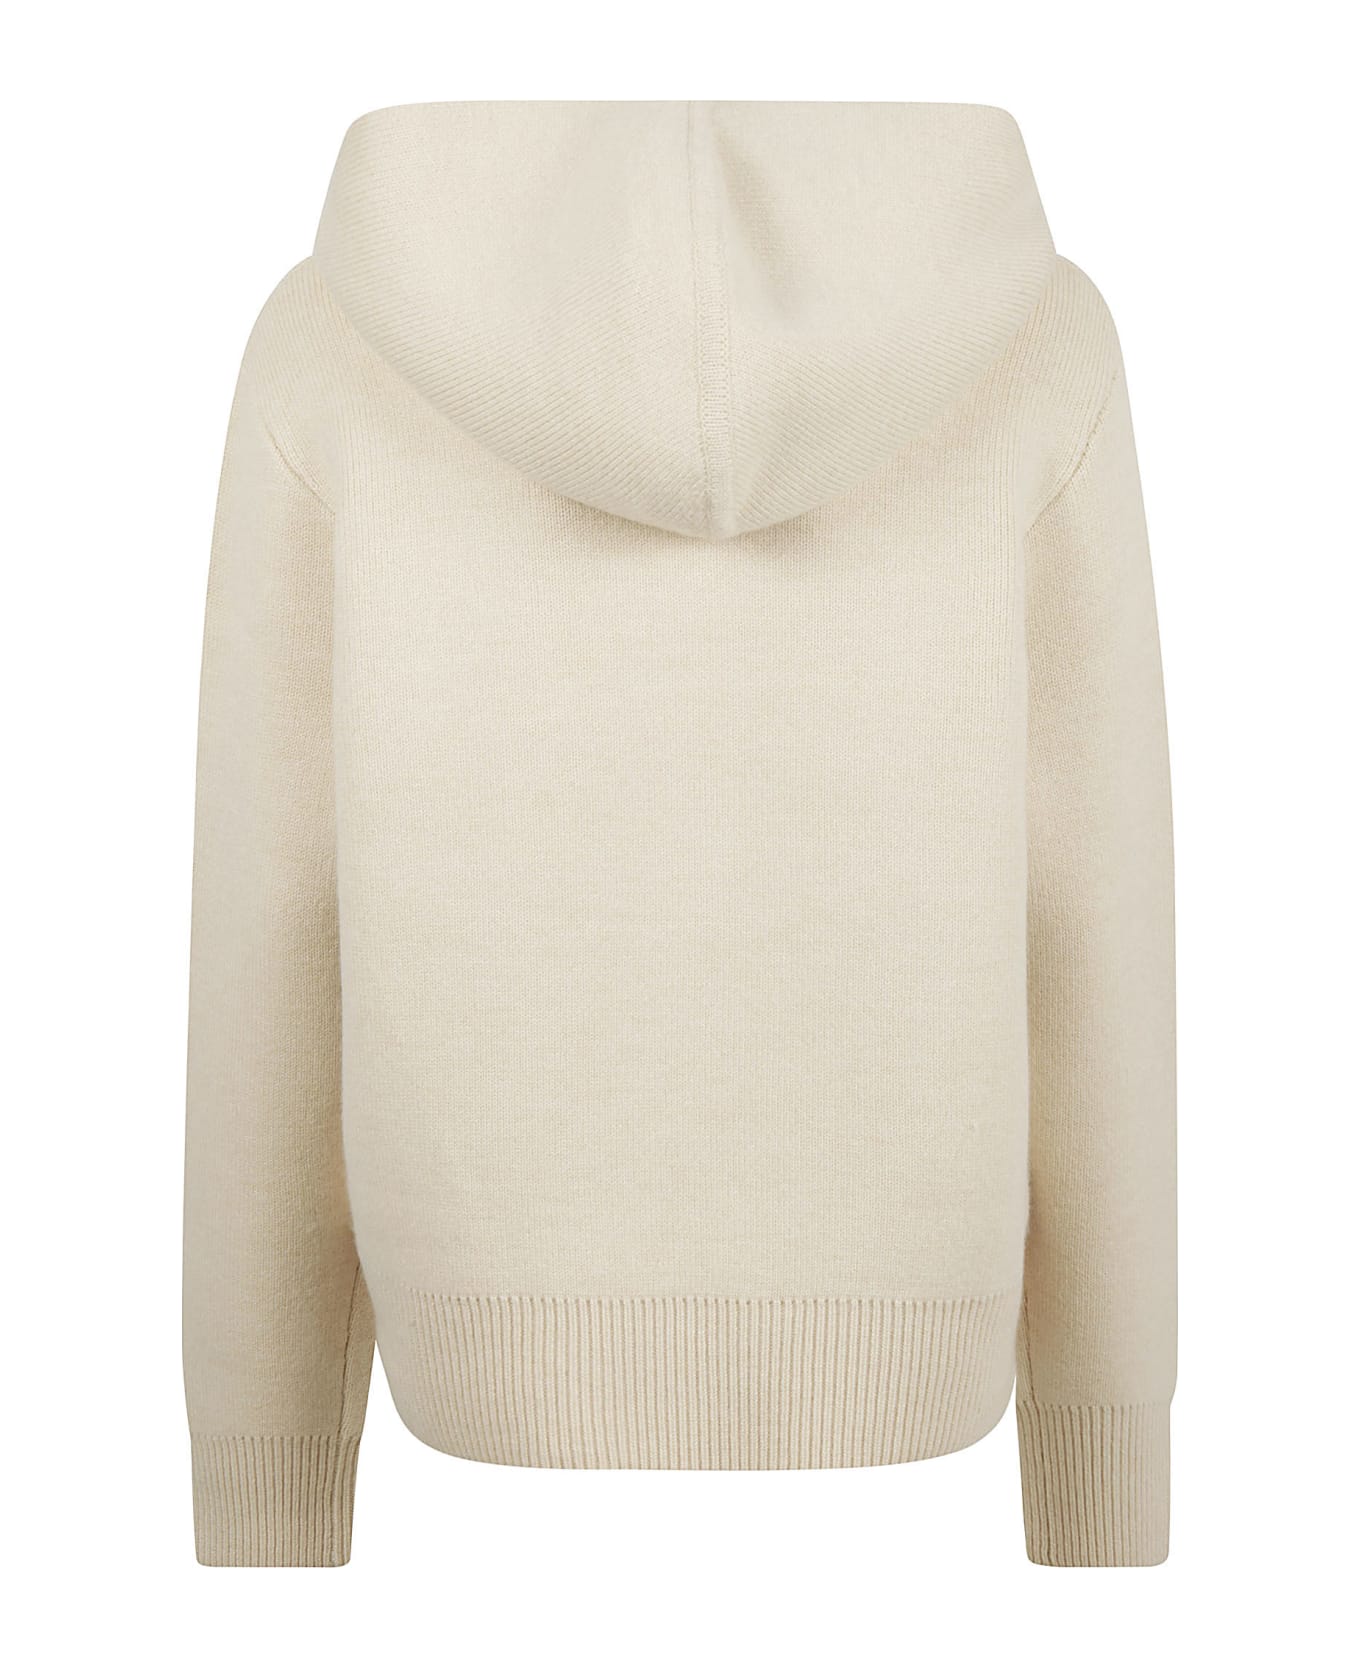 Tory Burch Cashmere Blend Hoodie - Plage ニットウェア